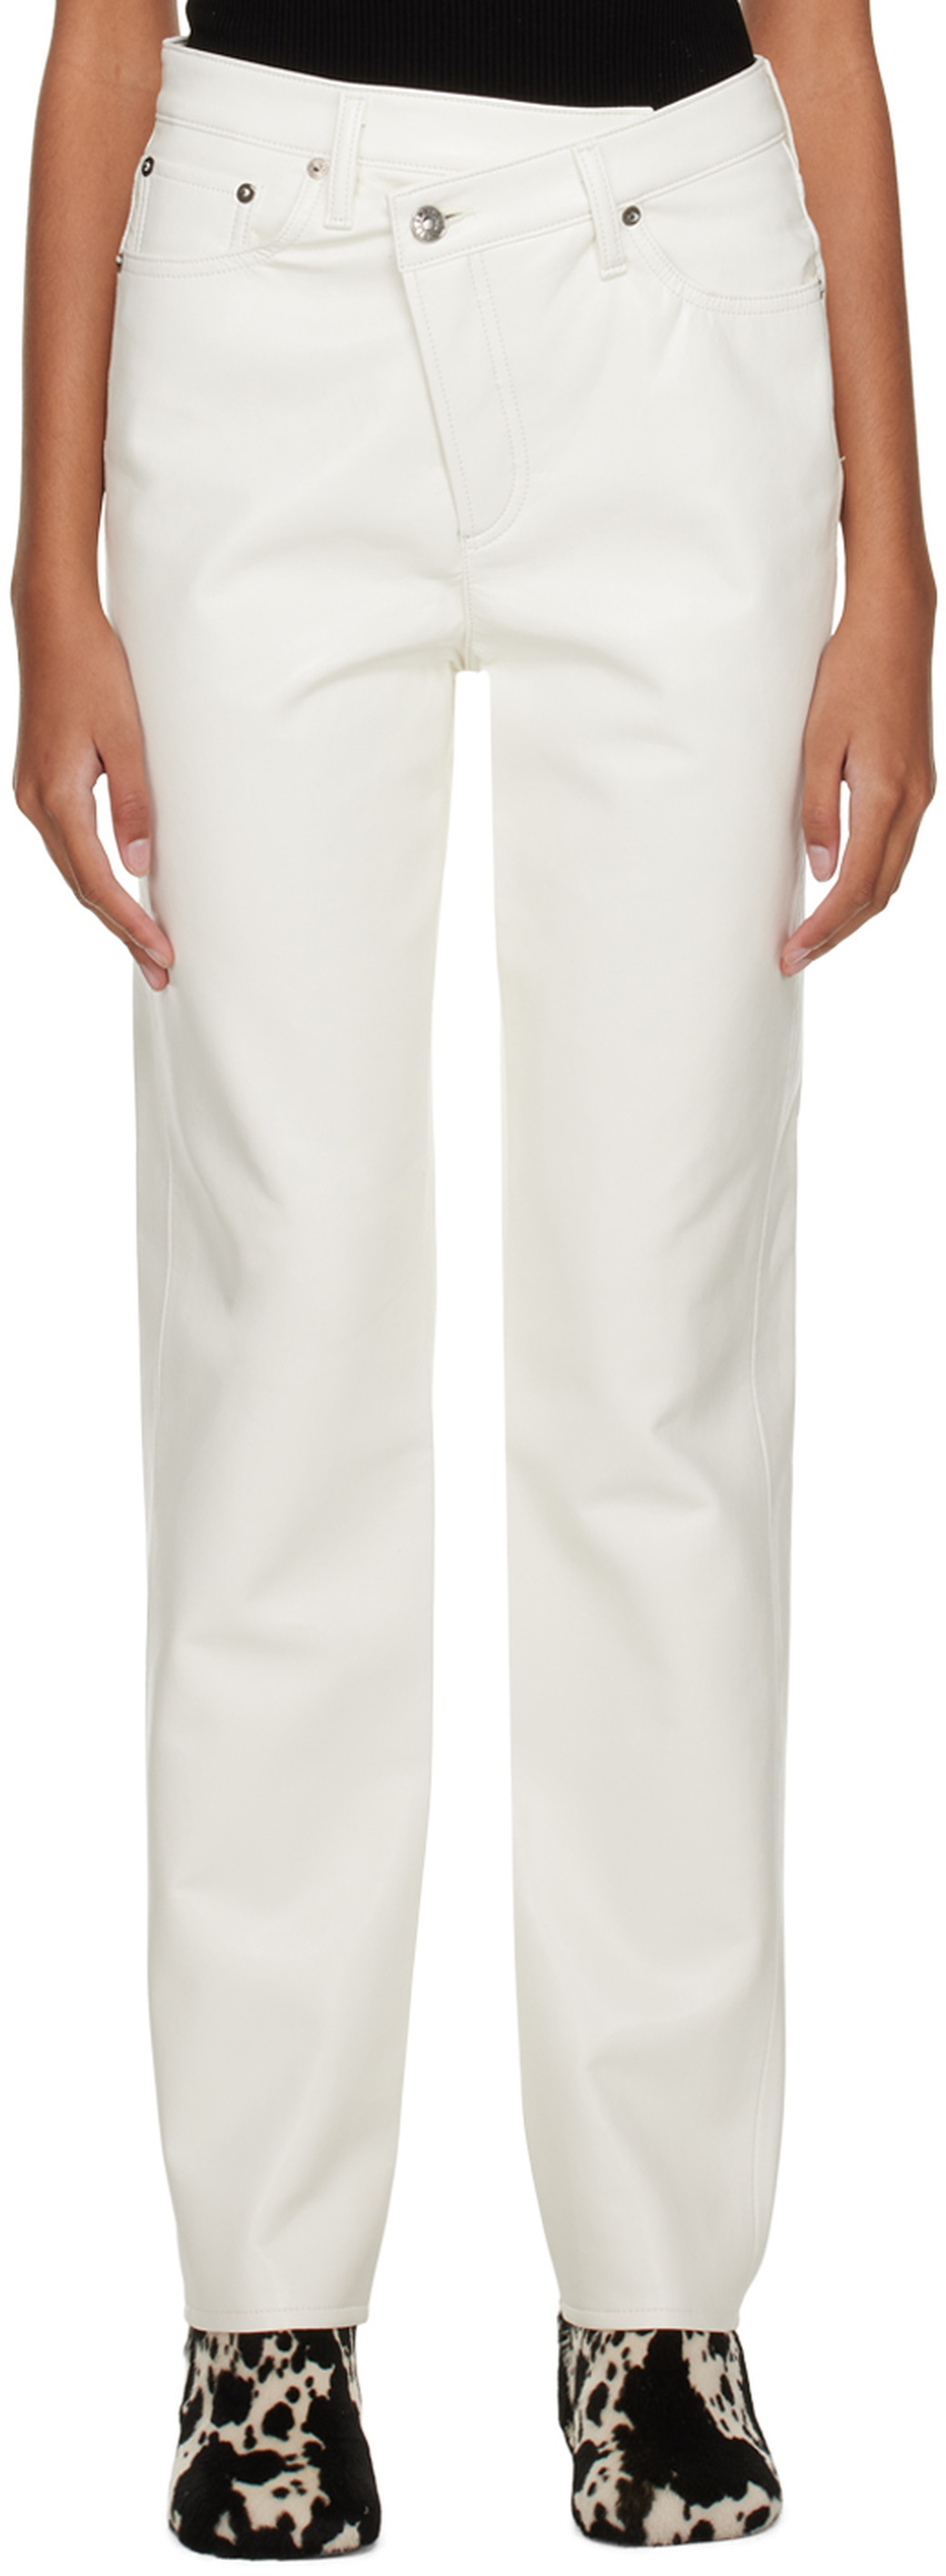 AGOLDE White Criss Cross Leather Pants AGOLDE